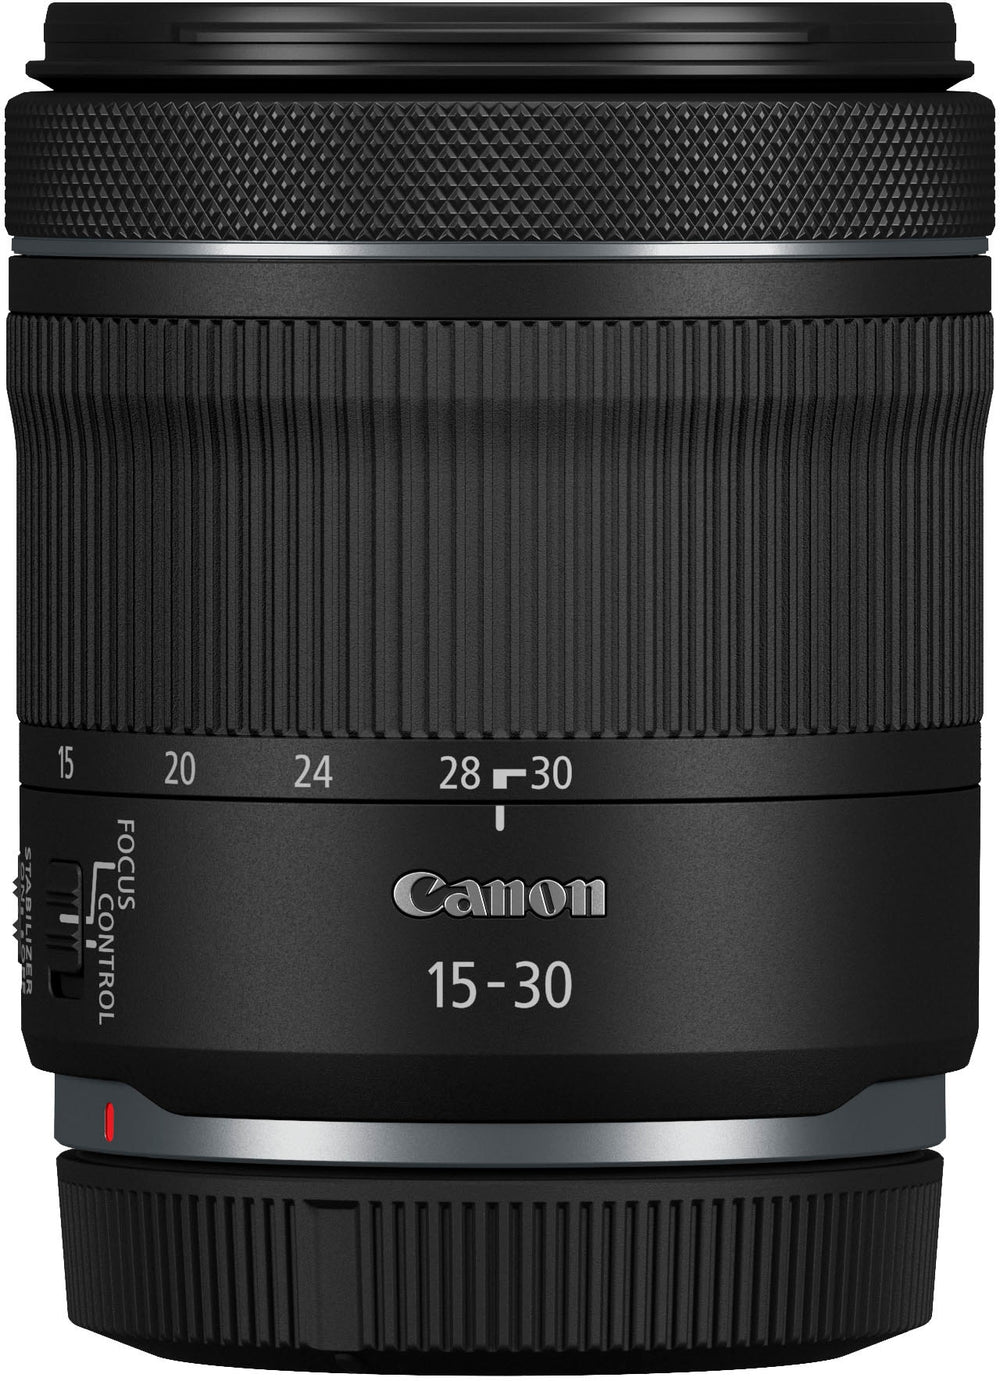 Canon - RF 15-30mm f/4.5-6.3 IS STM Ultra-Wide Angle Zoom Lens - Black_1